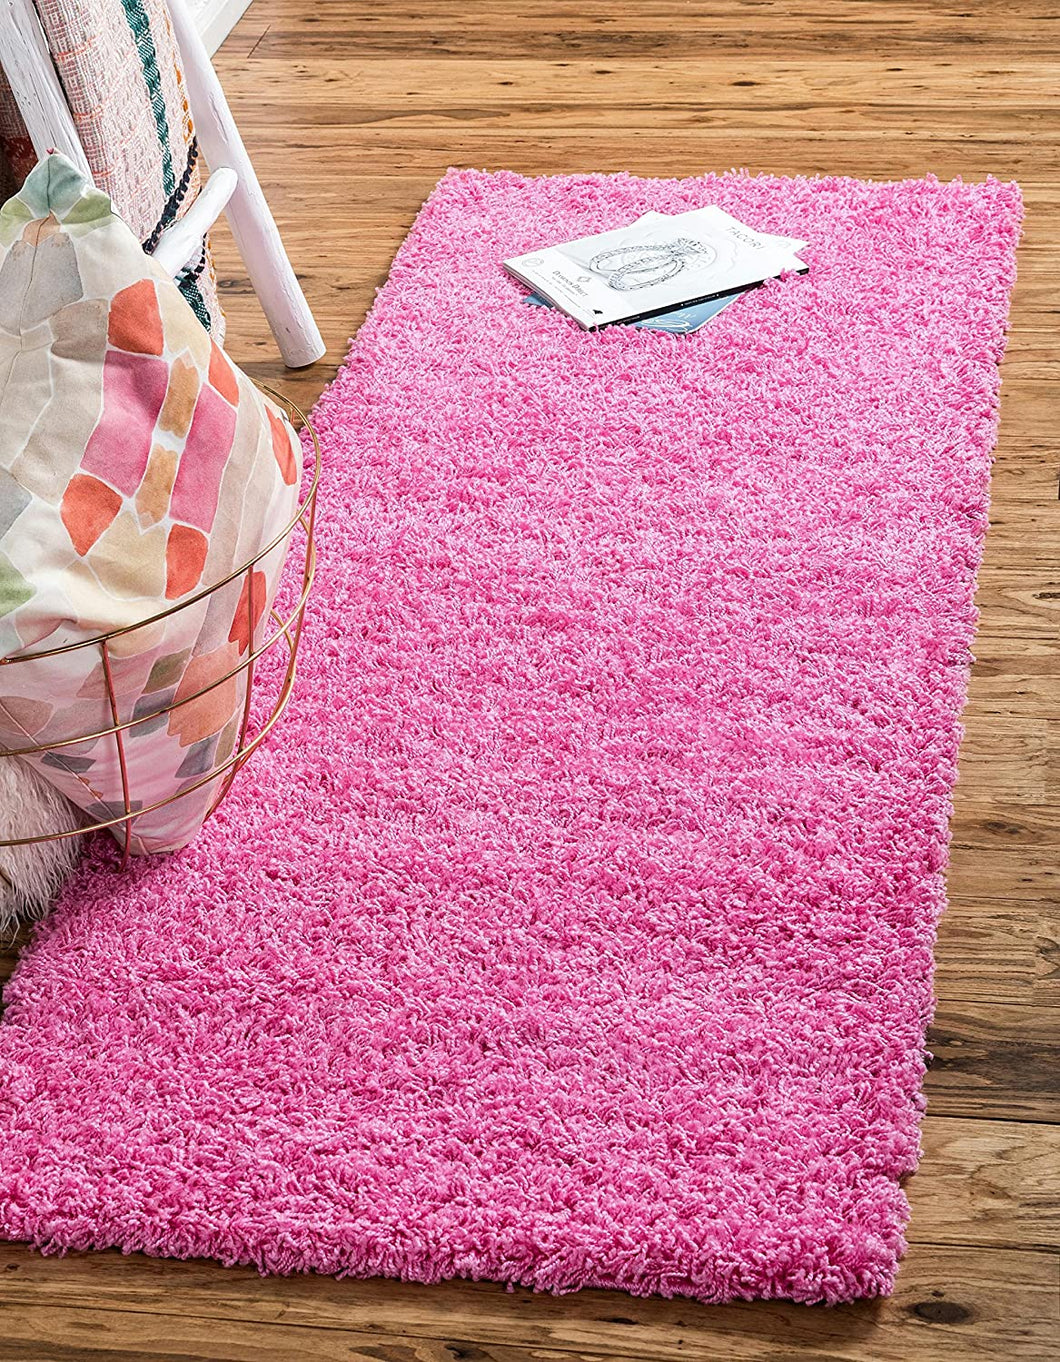 Unique Loom Solo Solid Shag Collection Modern Plush Taffy Pink Runner Rug (3' x 10')